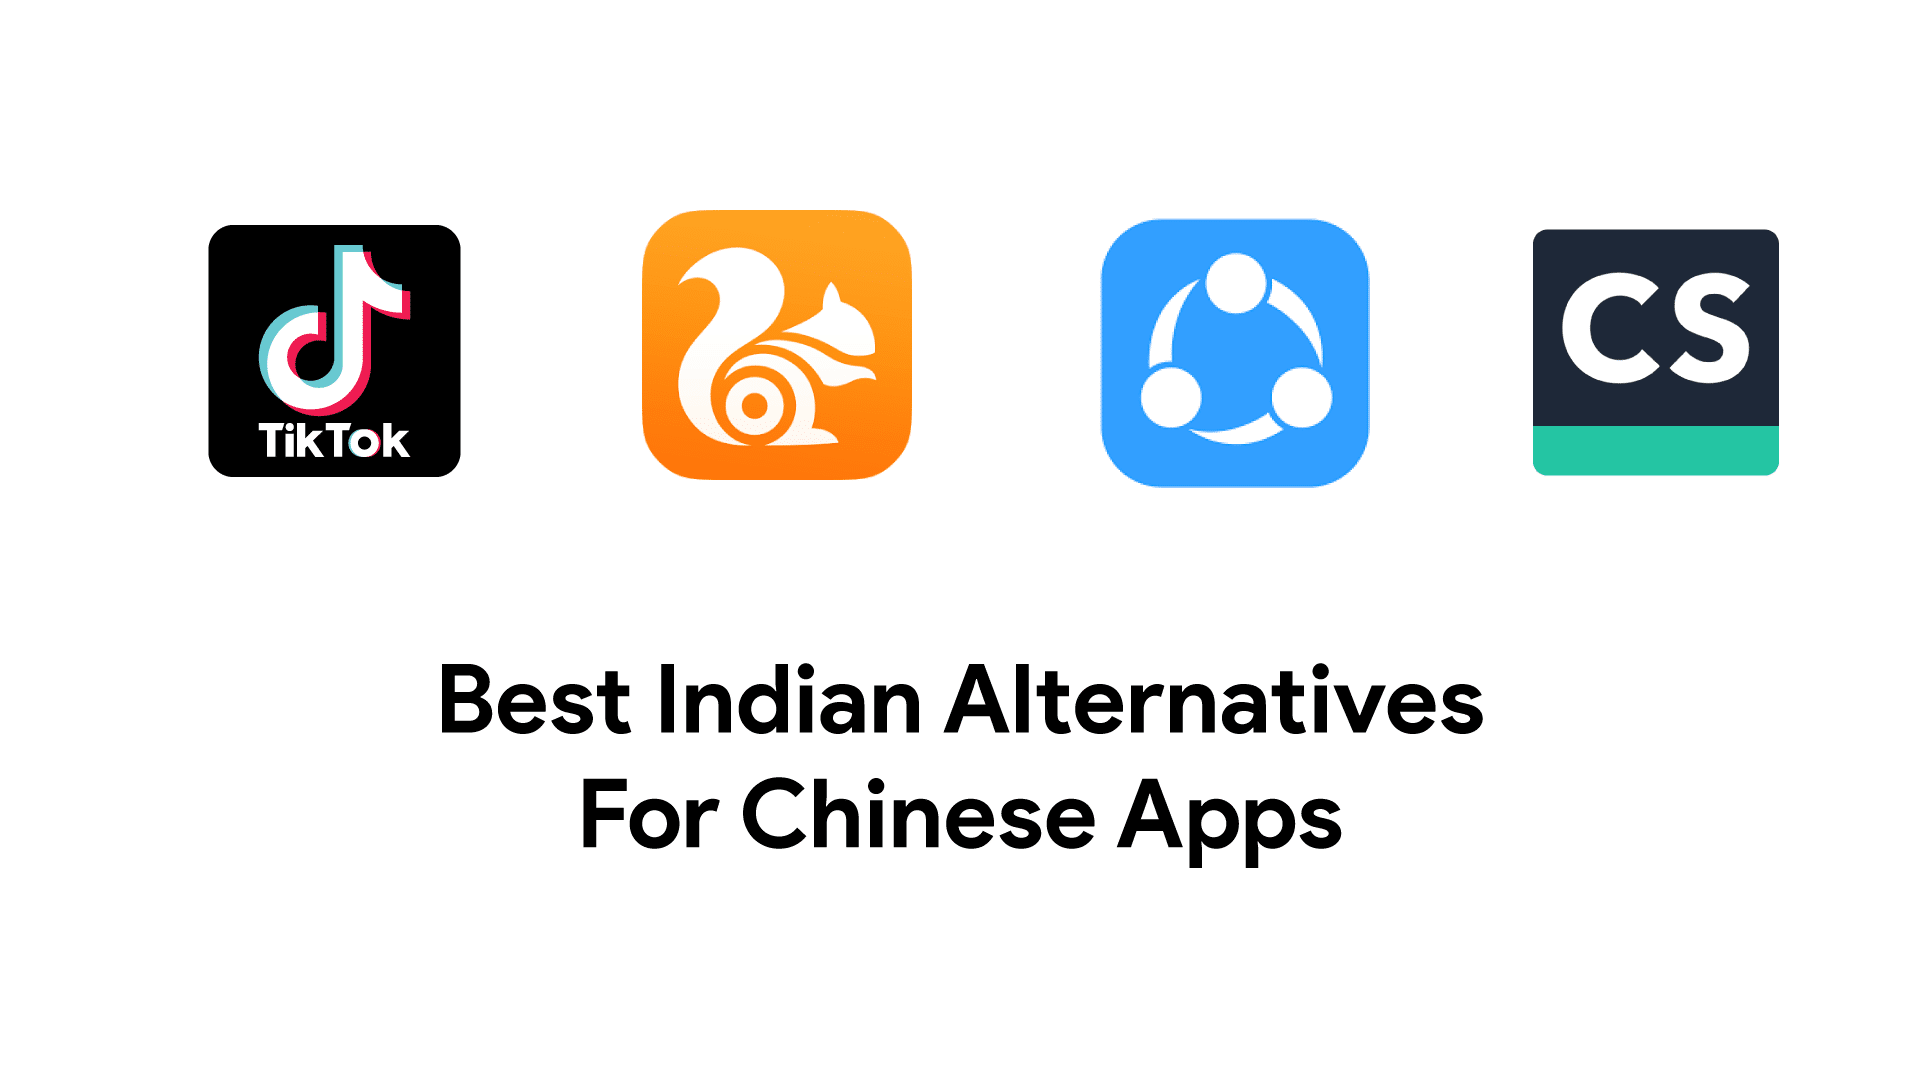 Best Indian Alternatives To Popular China Apps Banned in India for Android